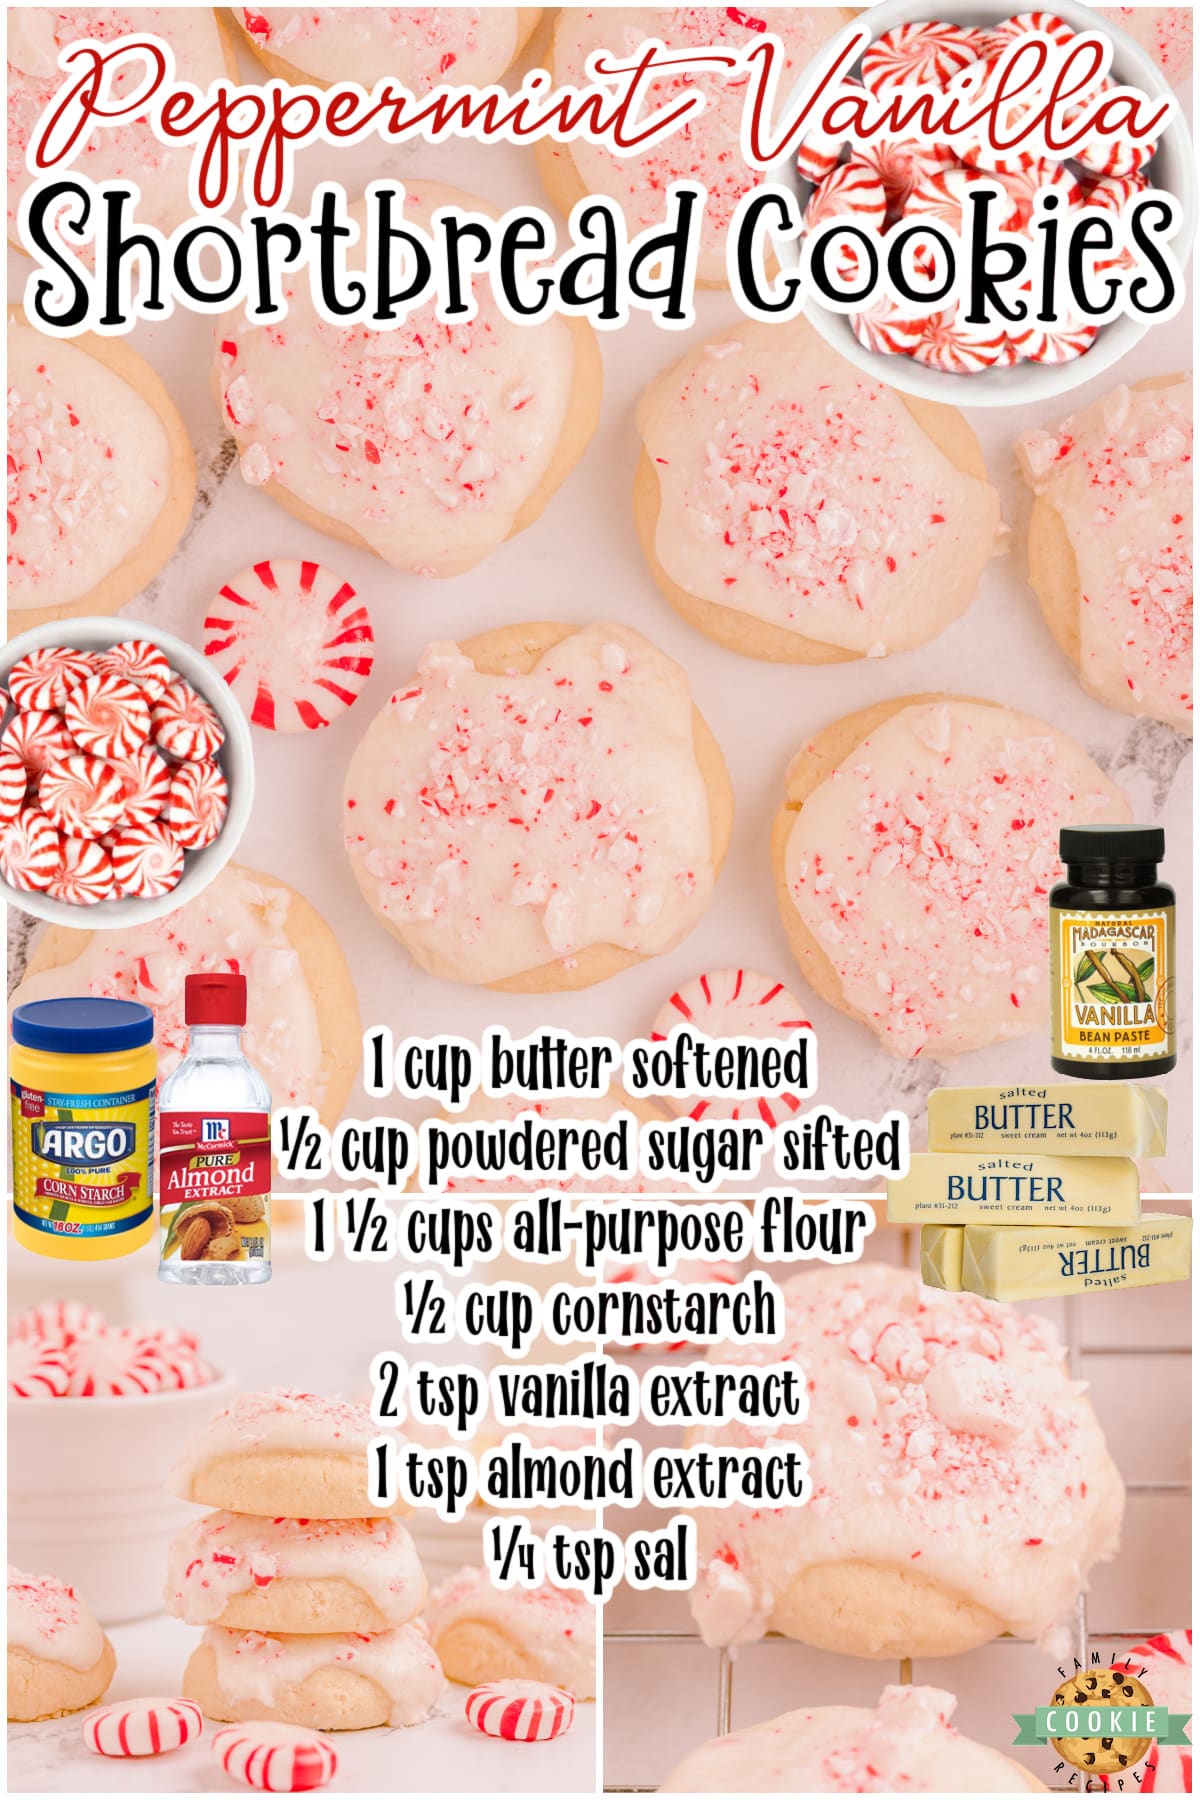 Peppermint Vanilla Shortbread Cookies are tender, buttery whipped shortbread with a lovely peppermint vanilla glaze! Delicious Christmas shortbread cookies for holiday trays!